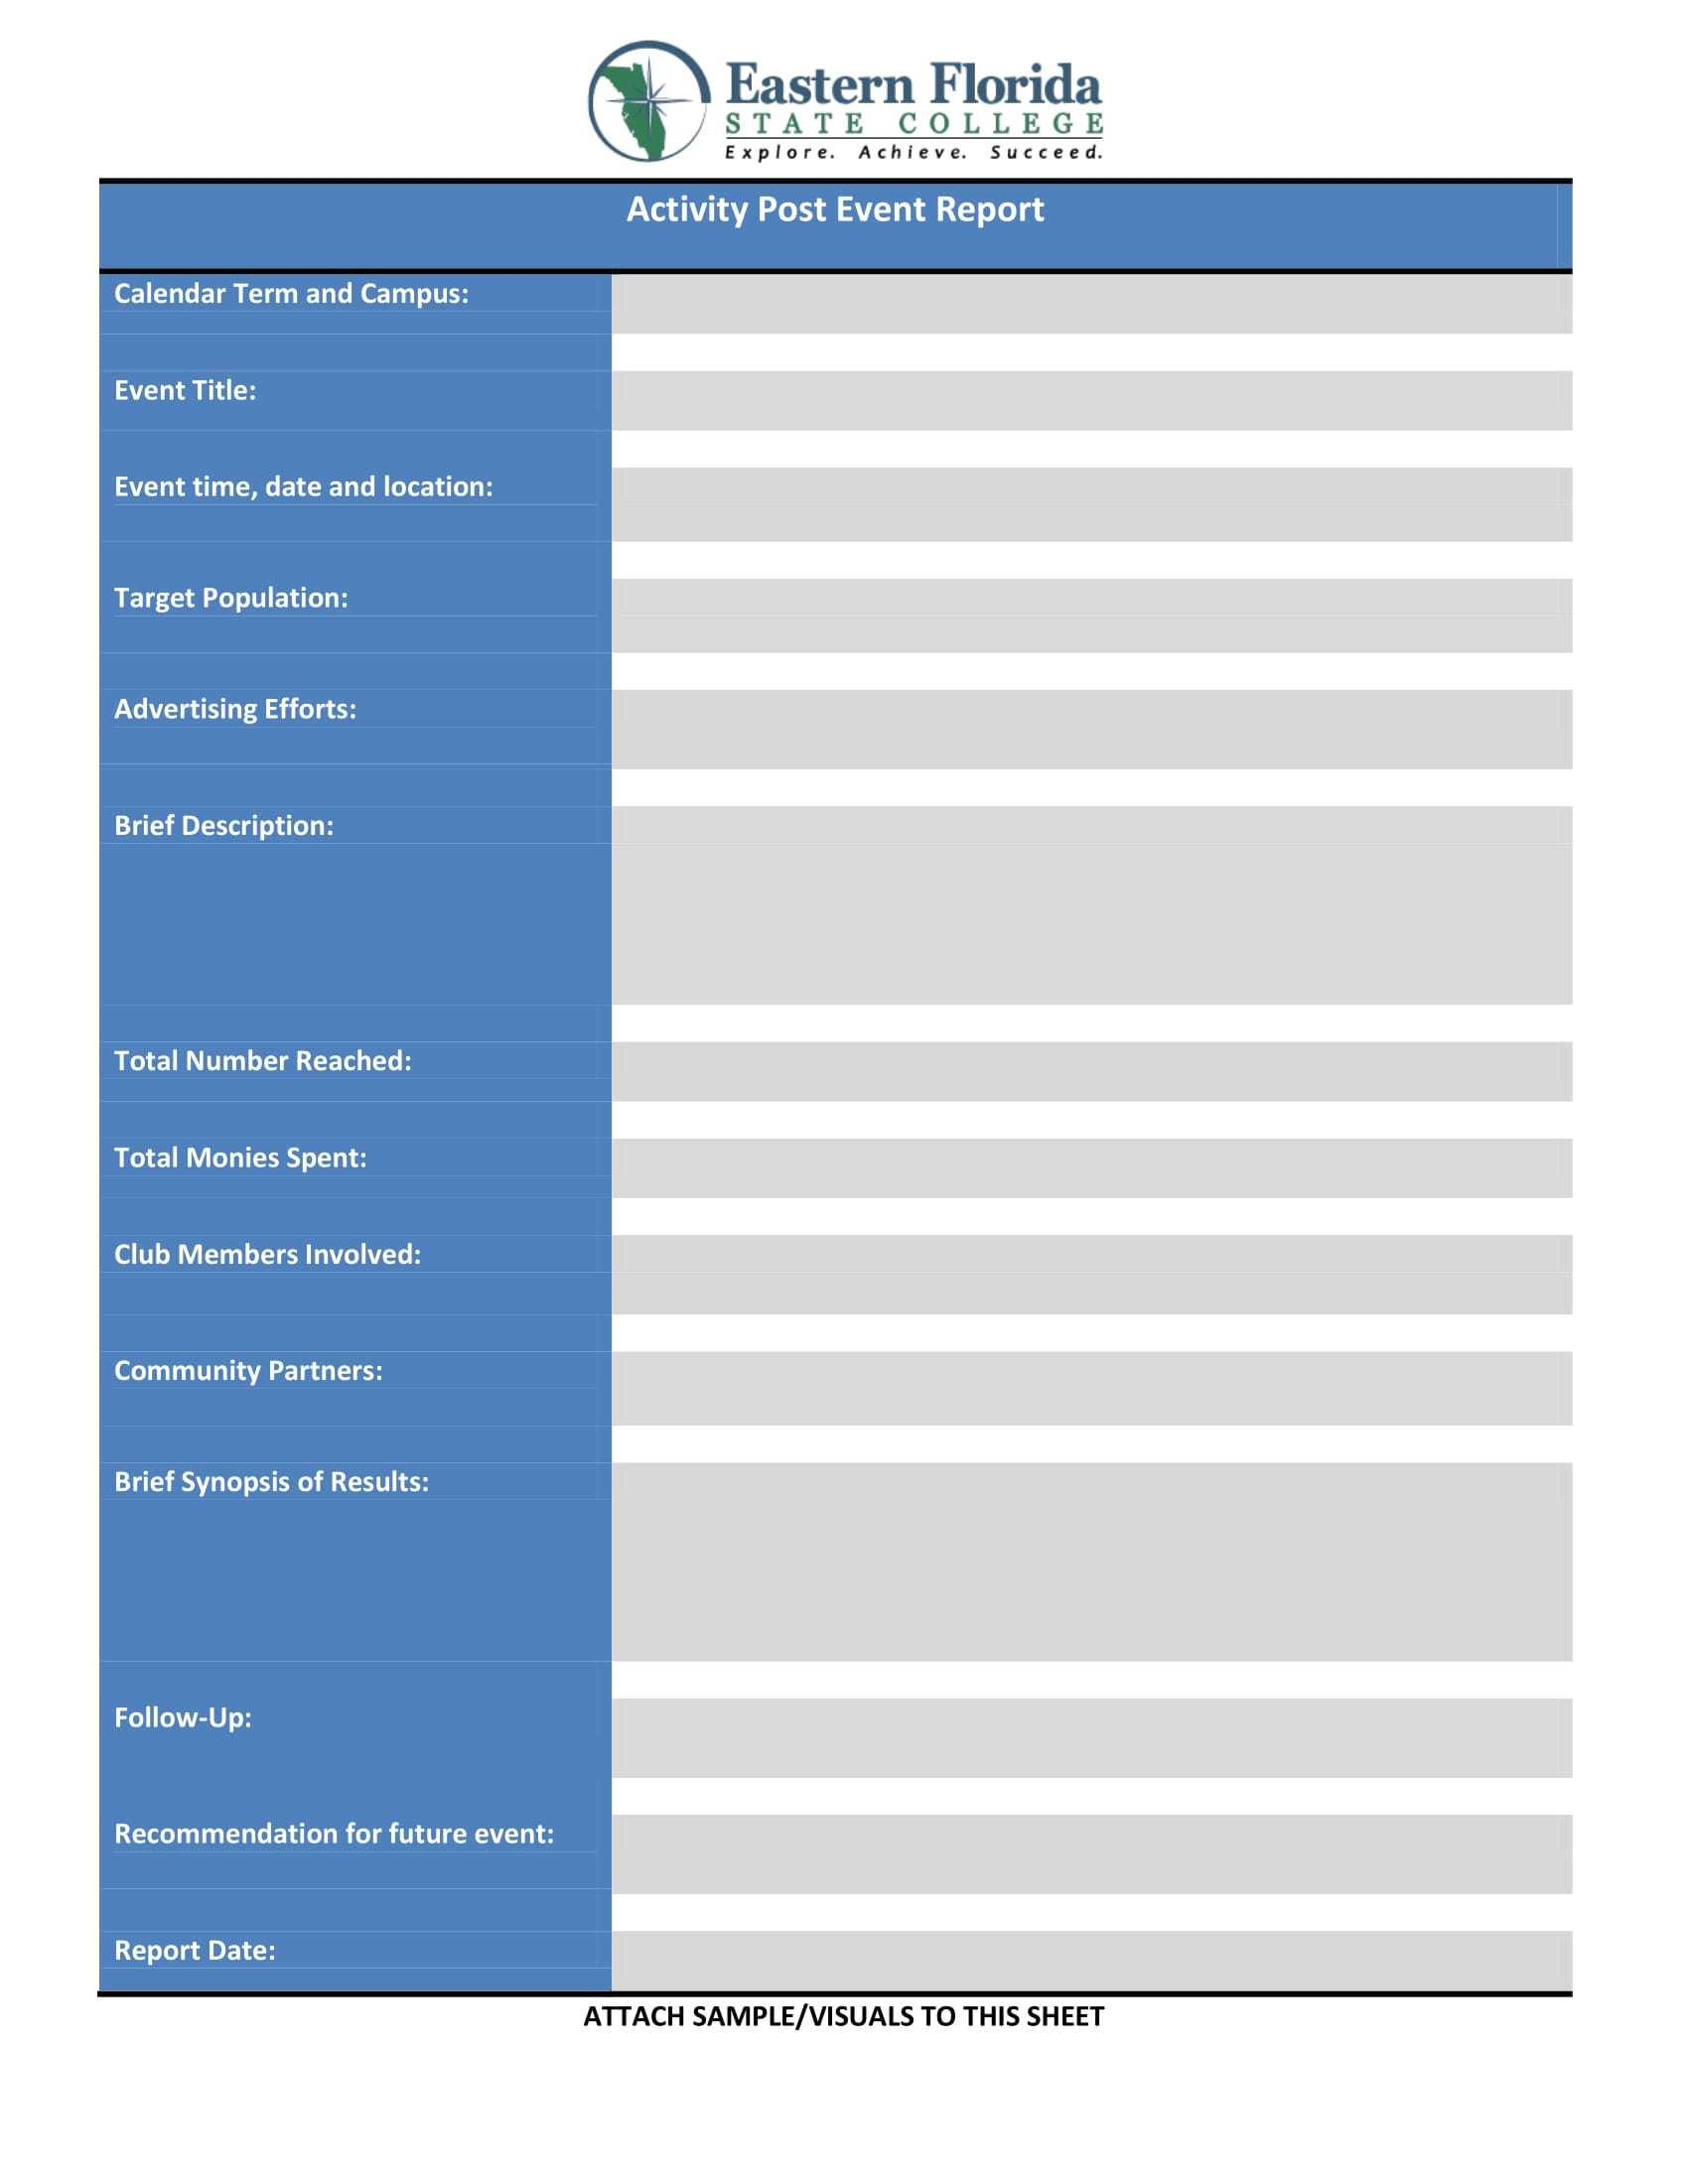 9+ Event Report - Pdf, Docs, Word, Pages | Examples Regarding Post Event Evaluation Report Template